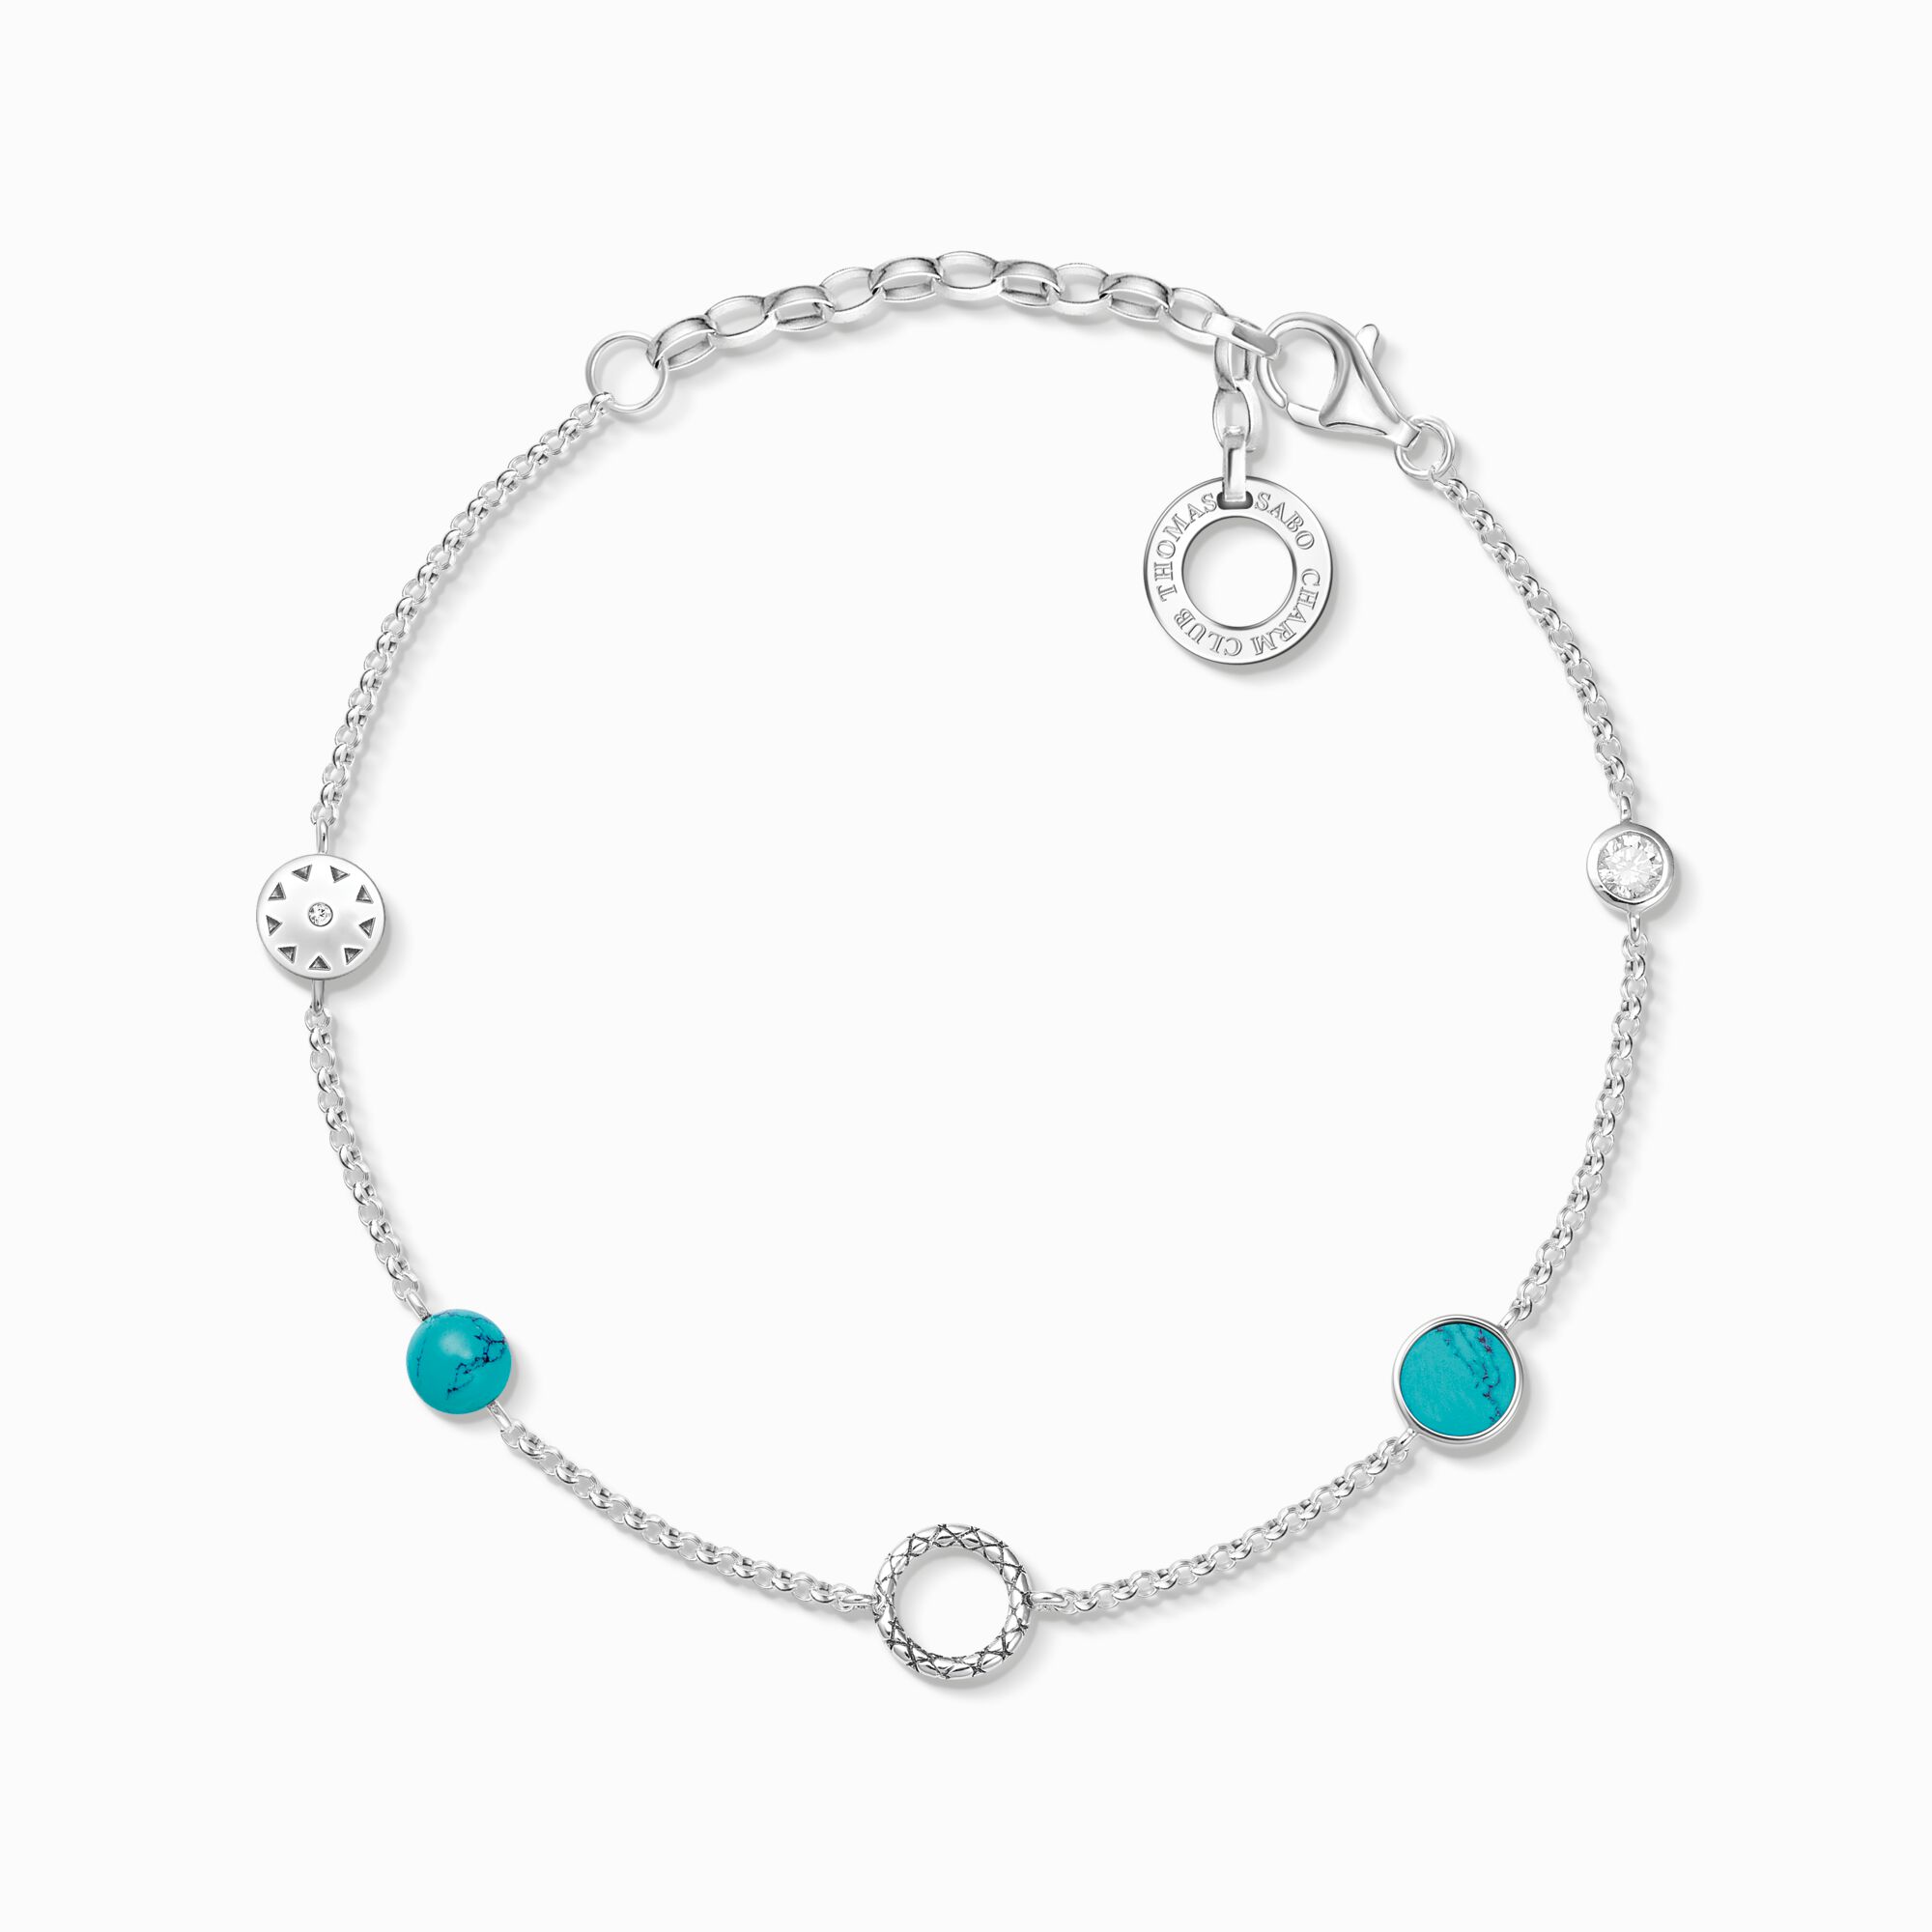 Charm bracelet turquoise stones from the Charm Club collection in the THOMAS SABO online store